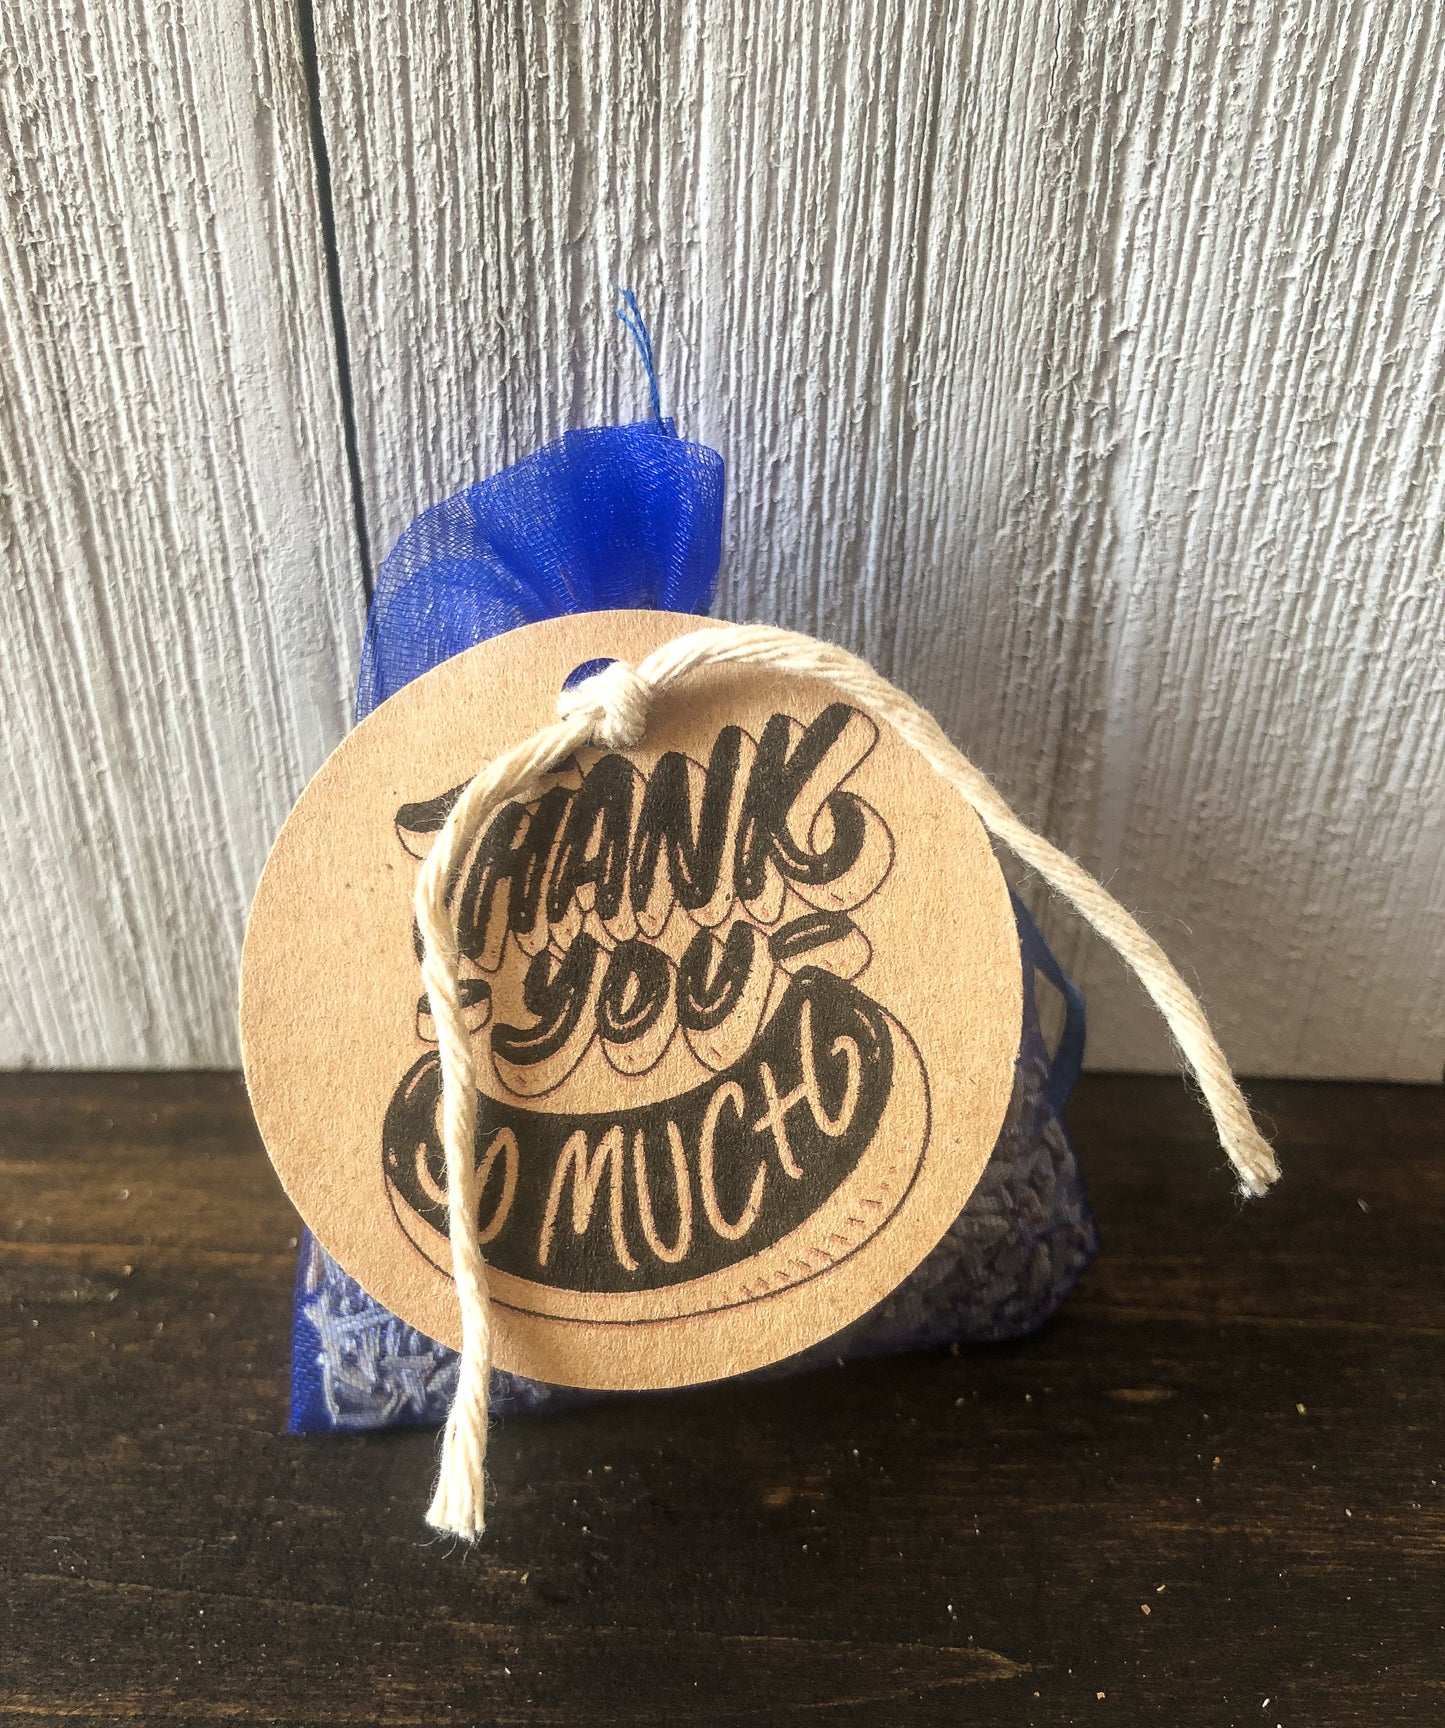 potpourri sachet for party favors/appreciation gifts on wooden background